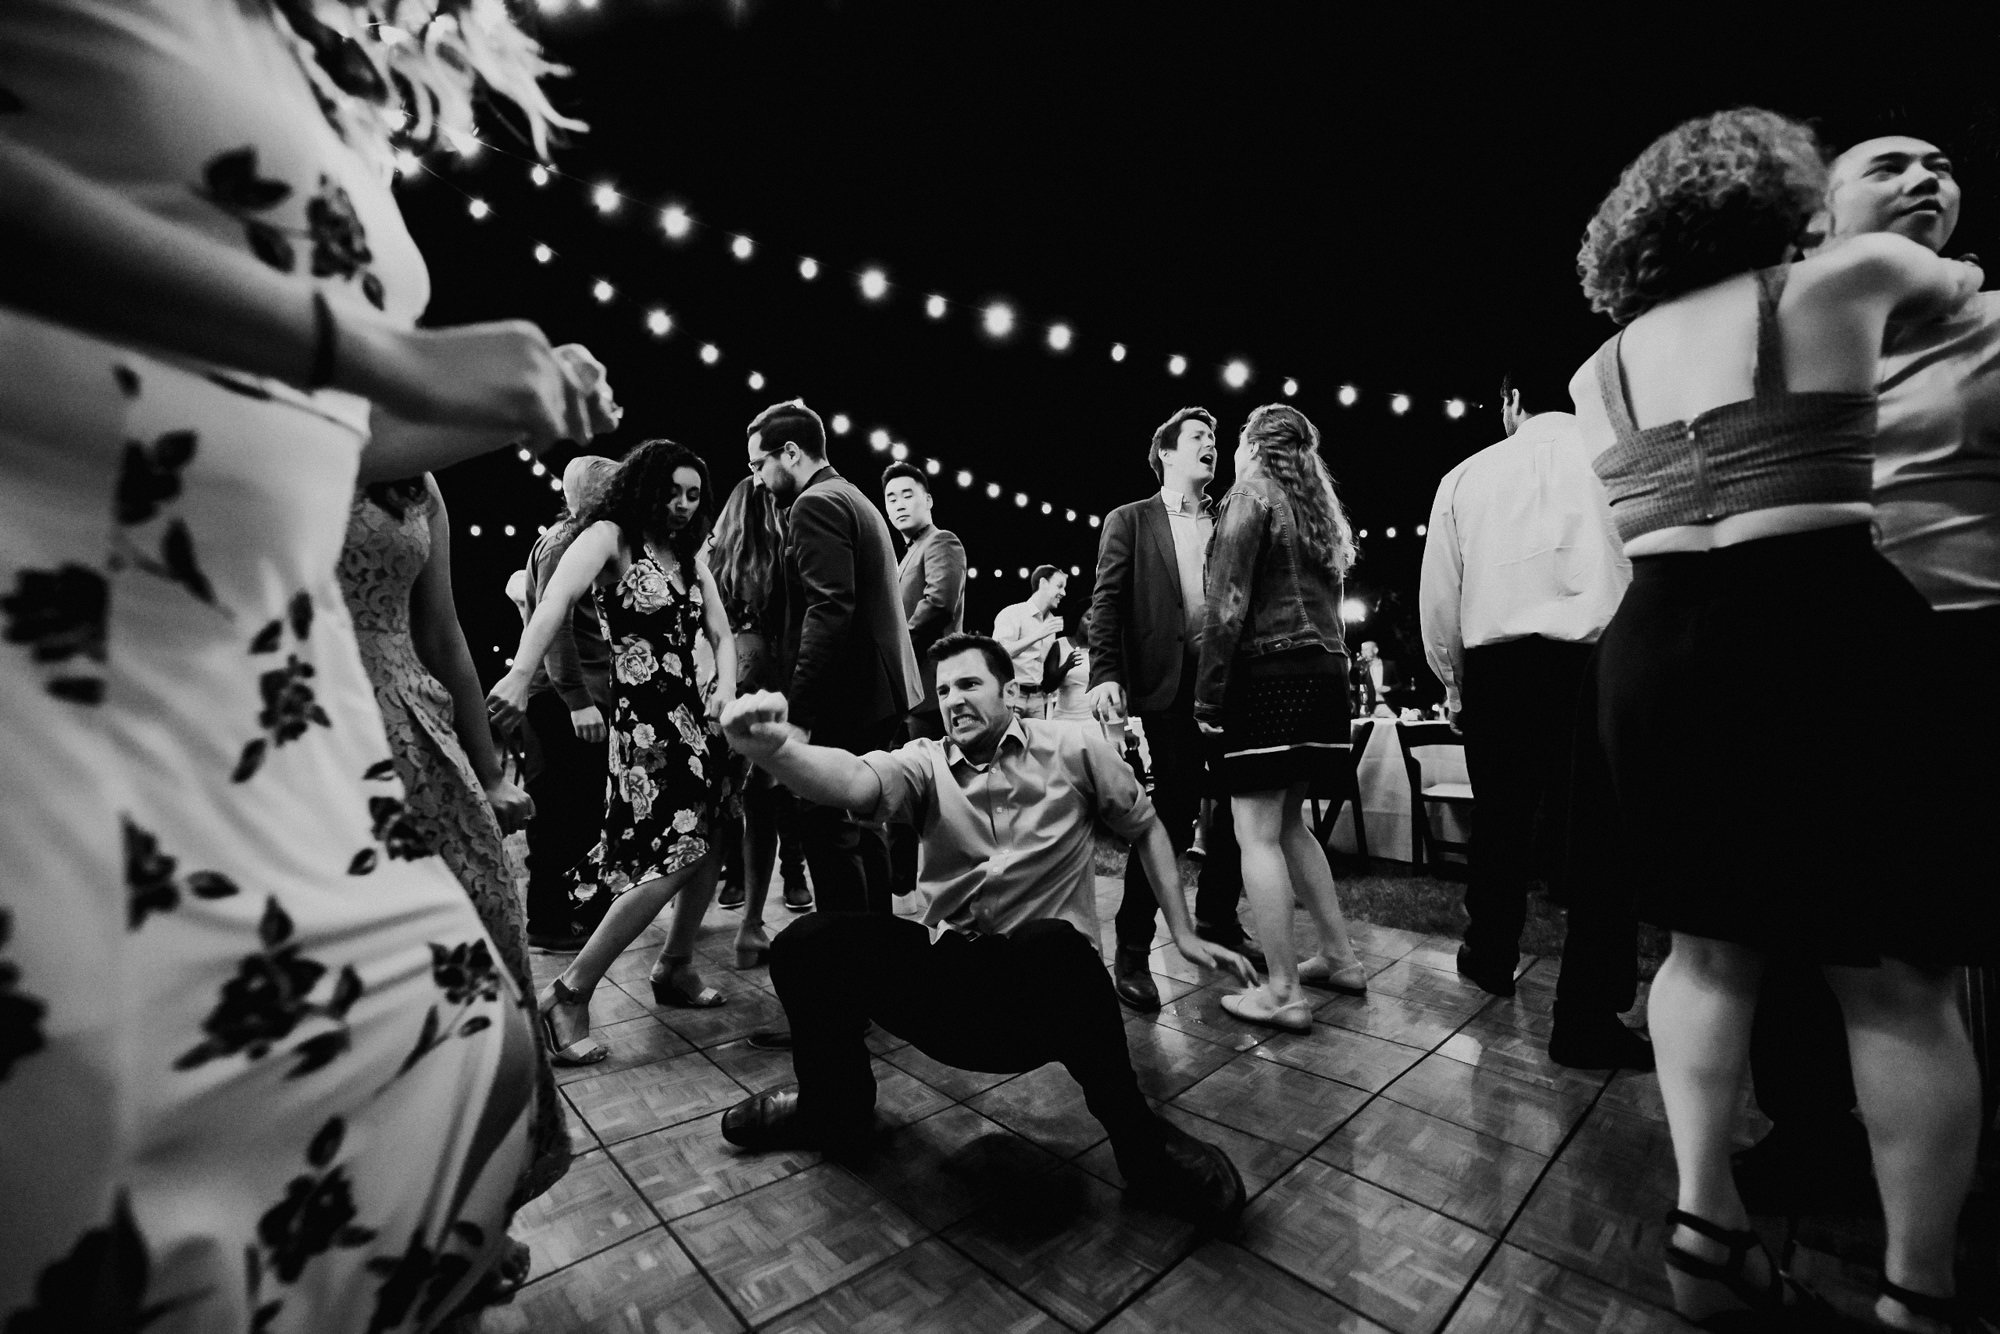 Saguaro Lake Guest Ranch The Perfect Location for a Laid-Back Fun-Filled Wedding. The best documentary wedding photographer Mantas Kubilinskas-74.jpg